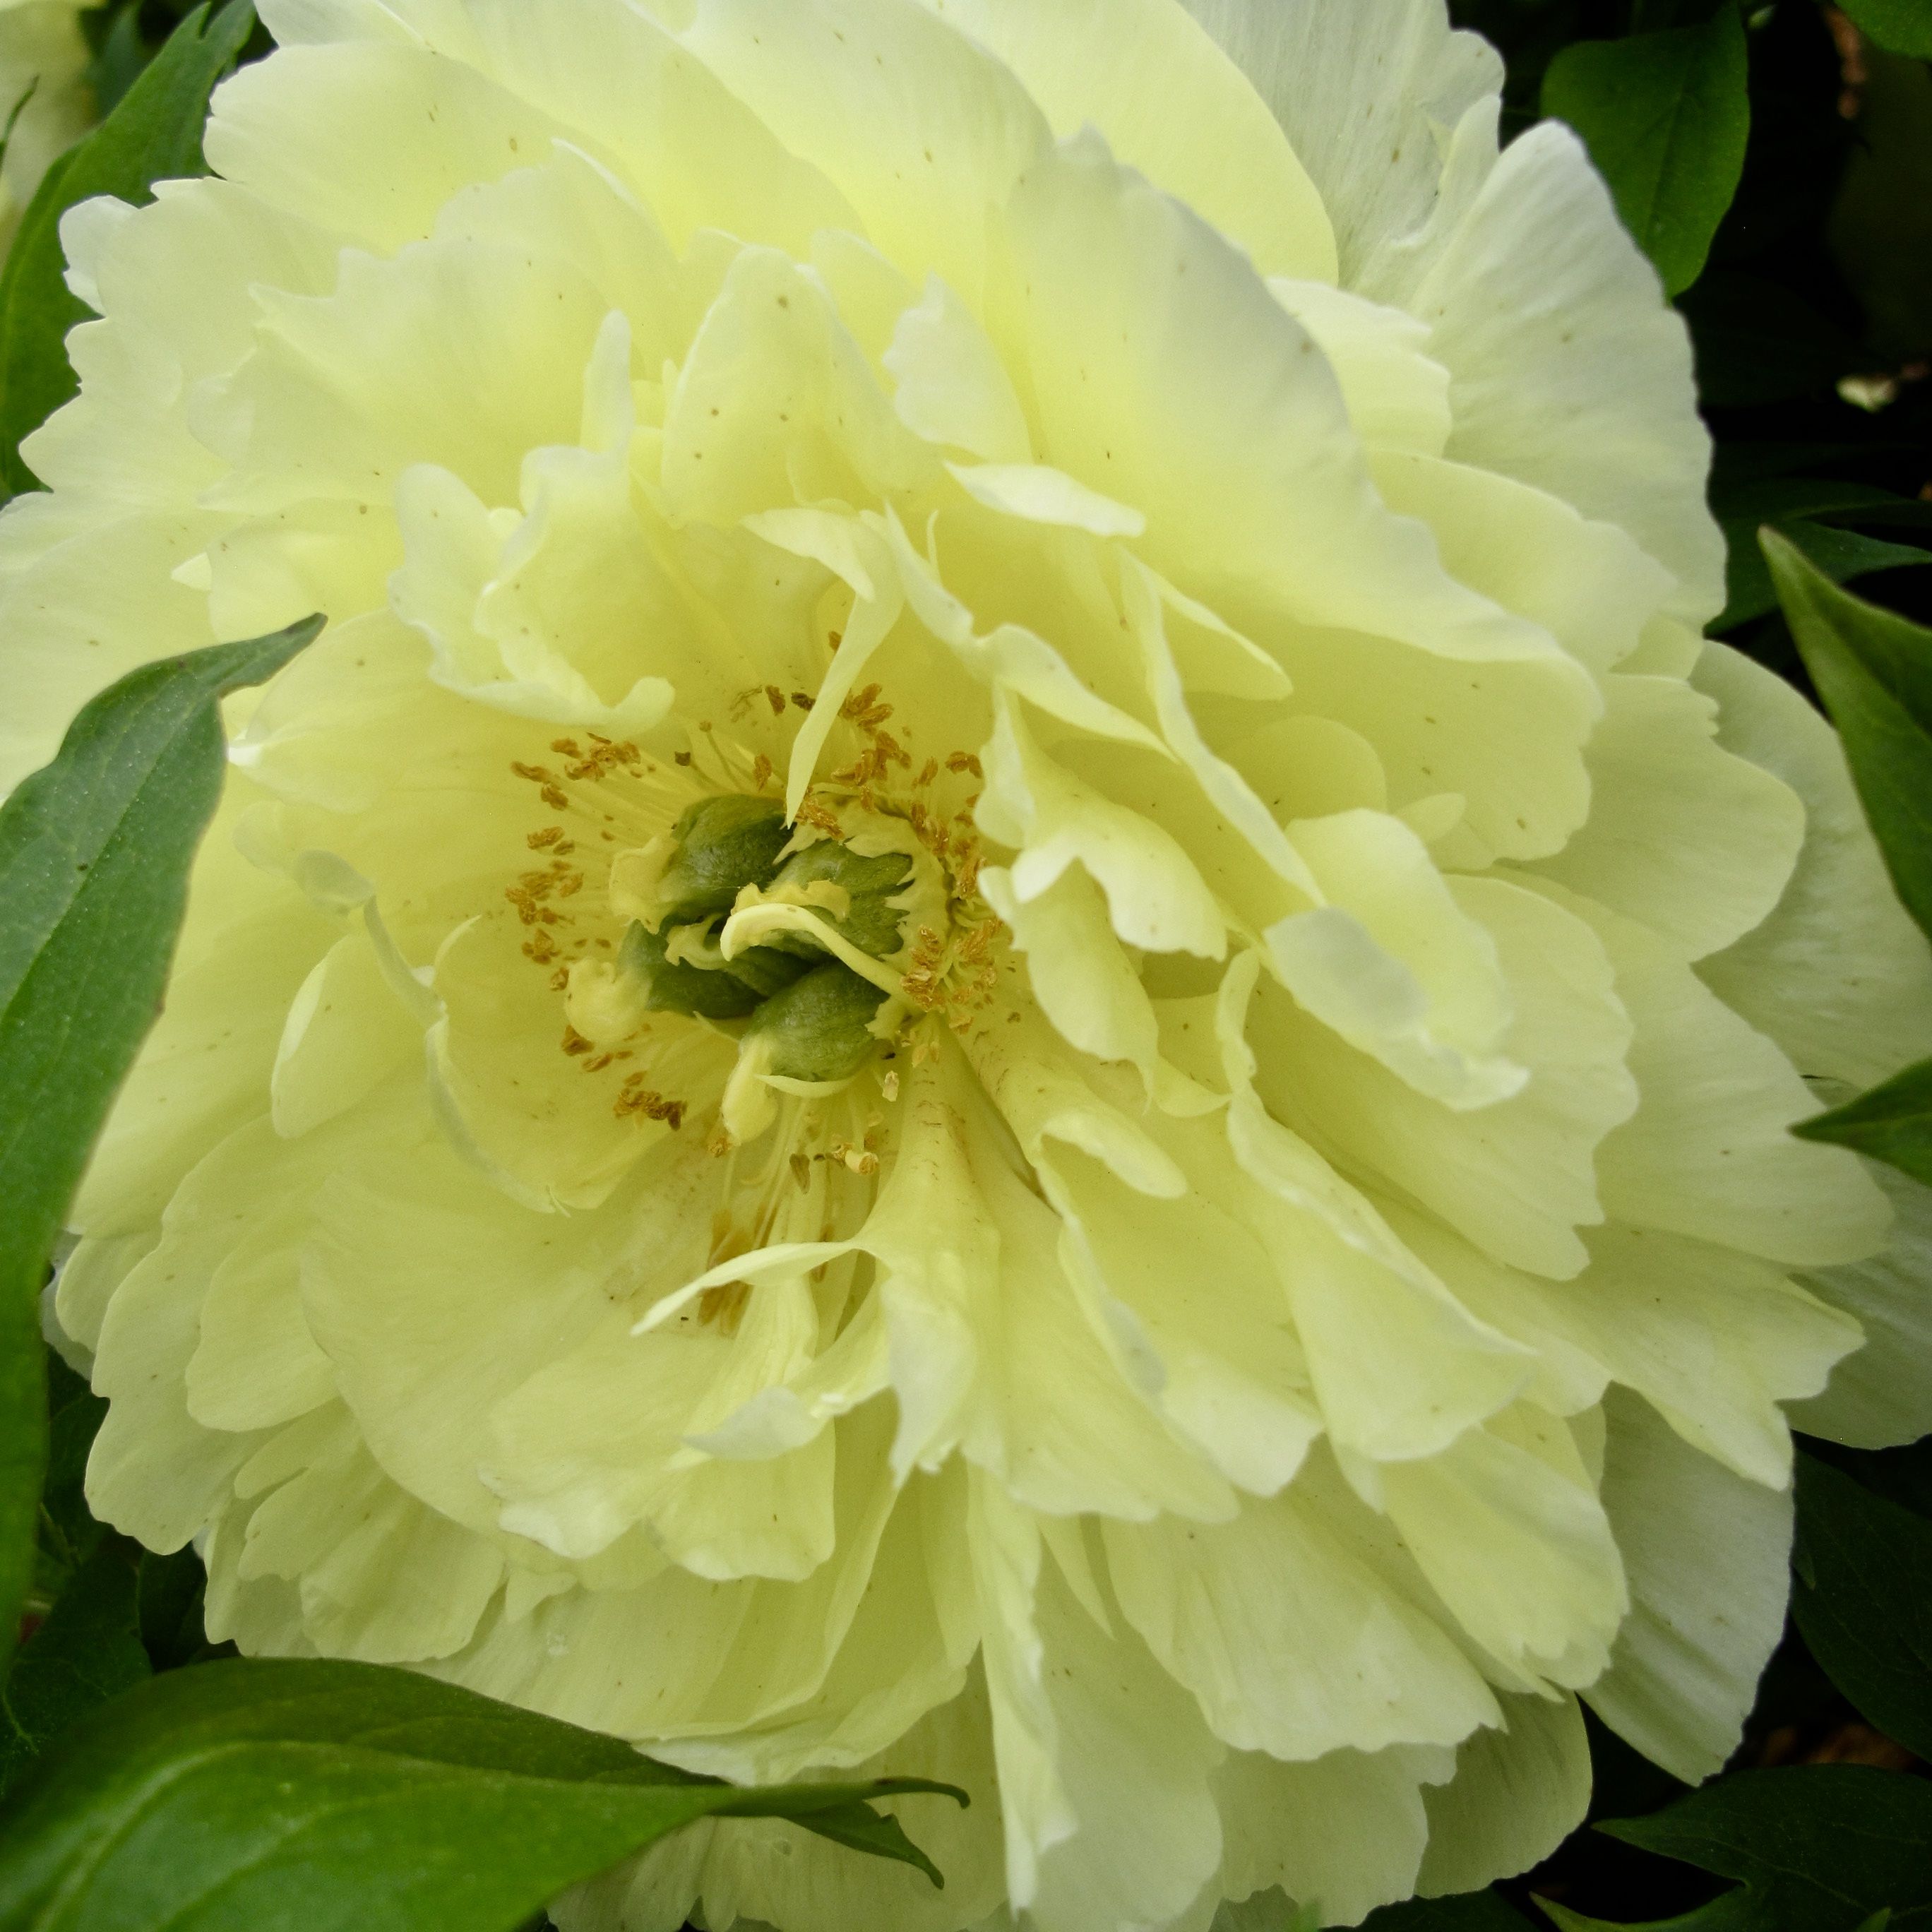 images/plants/paeonia/pae-golden-ticket/pae-golden-ticket-0004.JPG